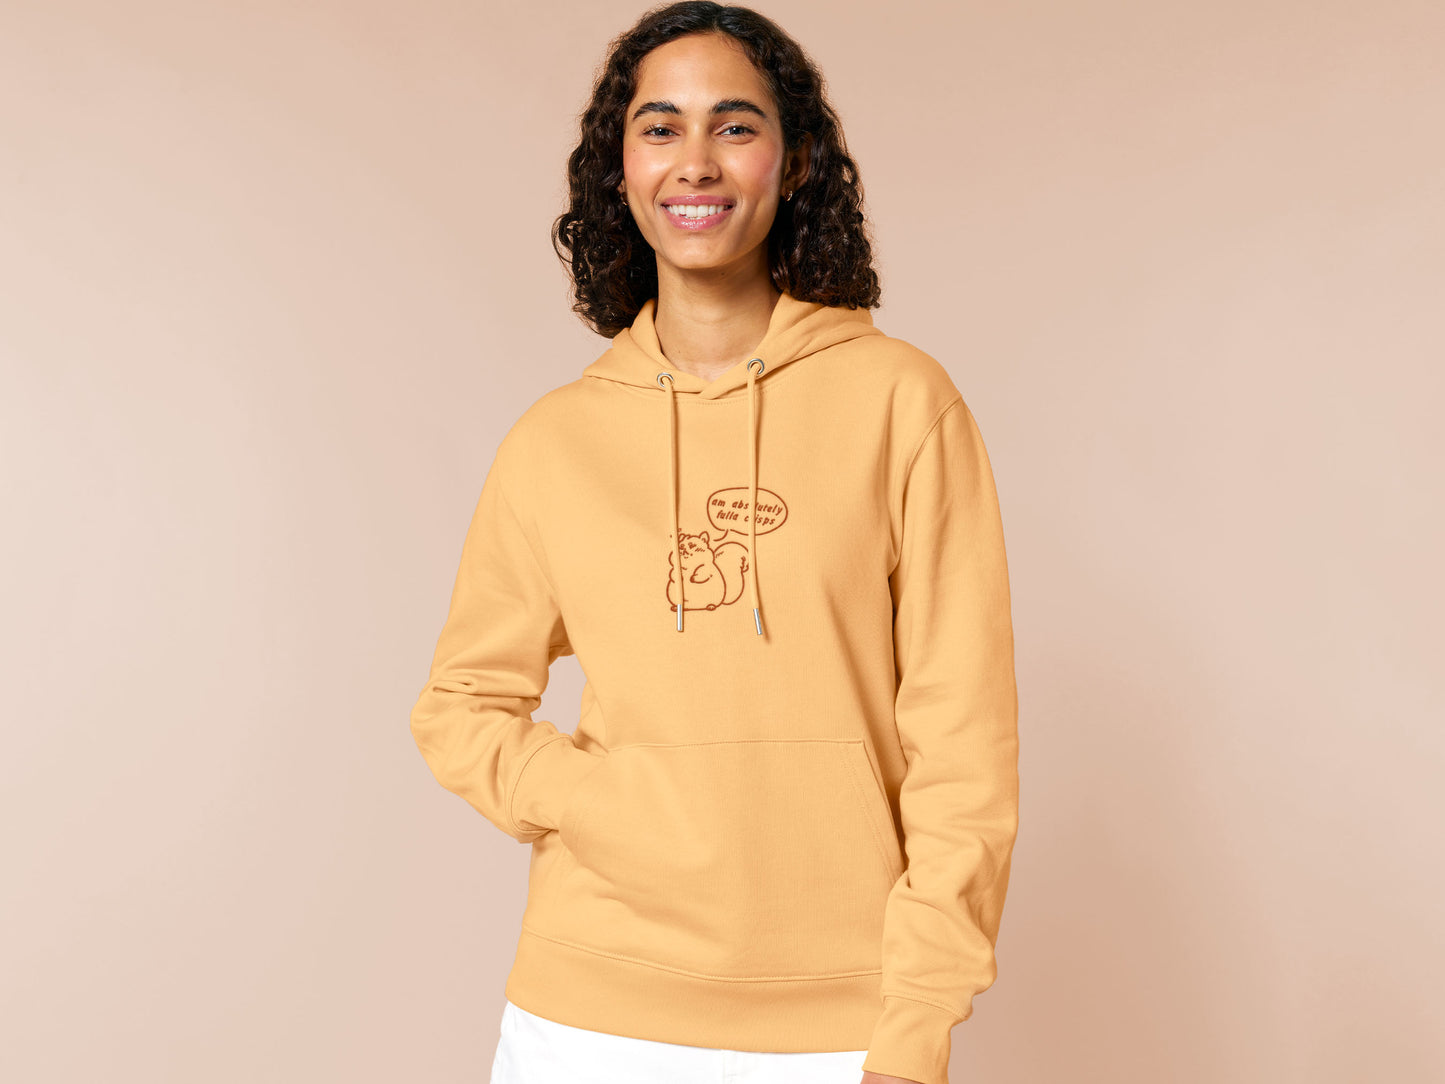 A woman wearing a long sleeved yellow fleece hoodie with an embroidered design of a cute fat squirrel and a speech bubble with the text am absolutely fulla crisps